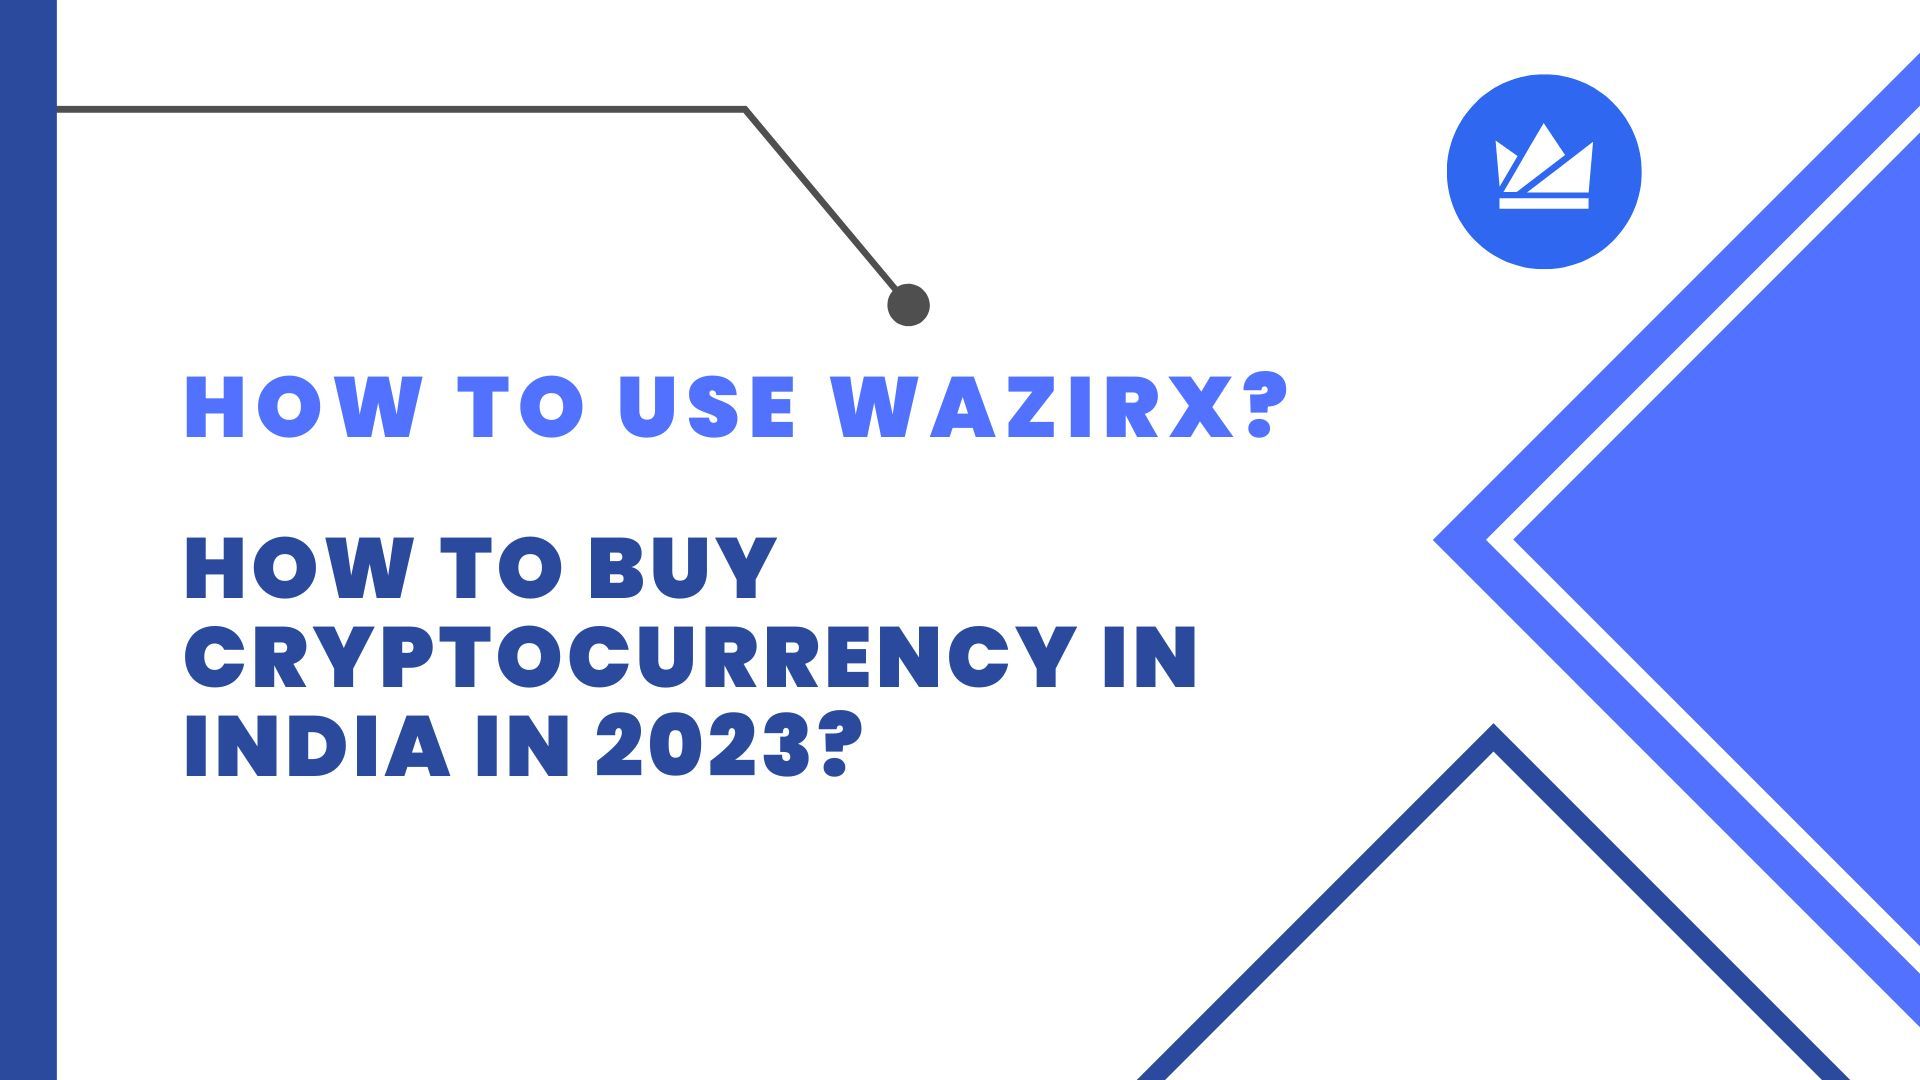 How to use WazirX? How to buy cryptocurrency in India in 2023?